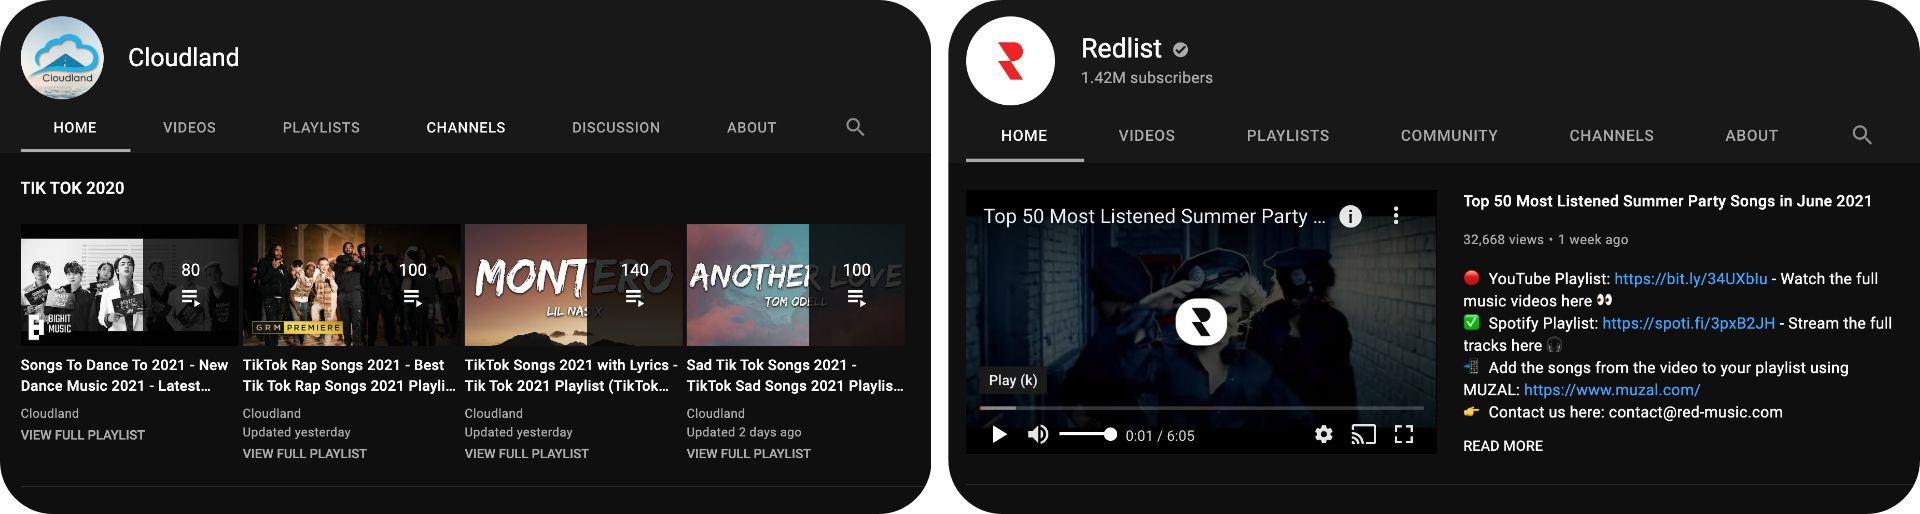 Screenshots of TikTok music videos and playlists by Cloudland and Redlist on YouTube.